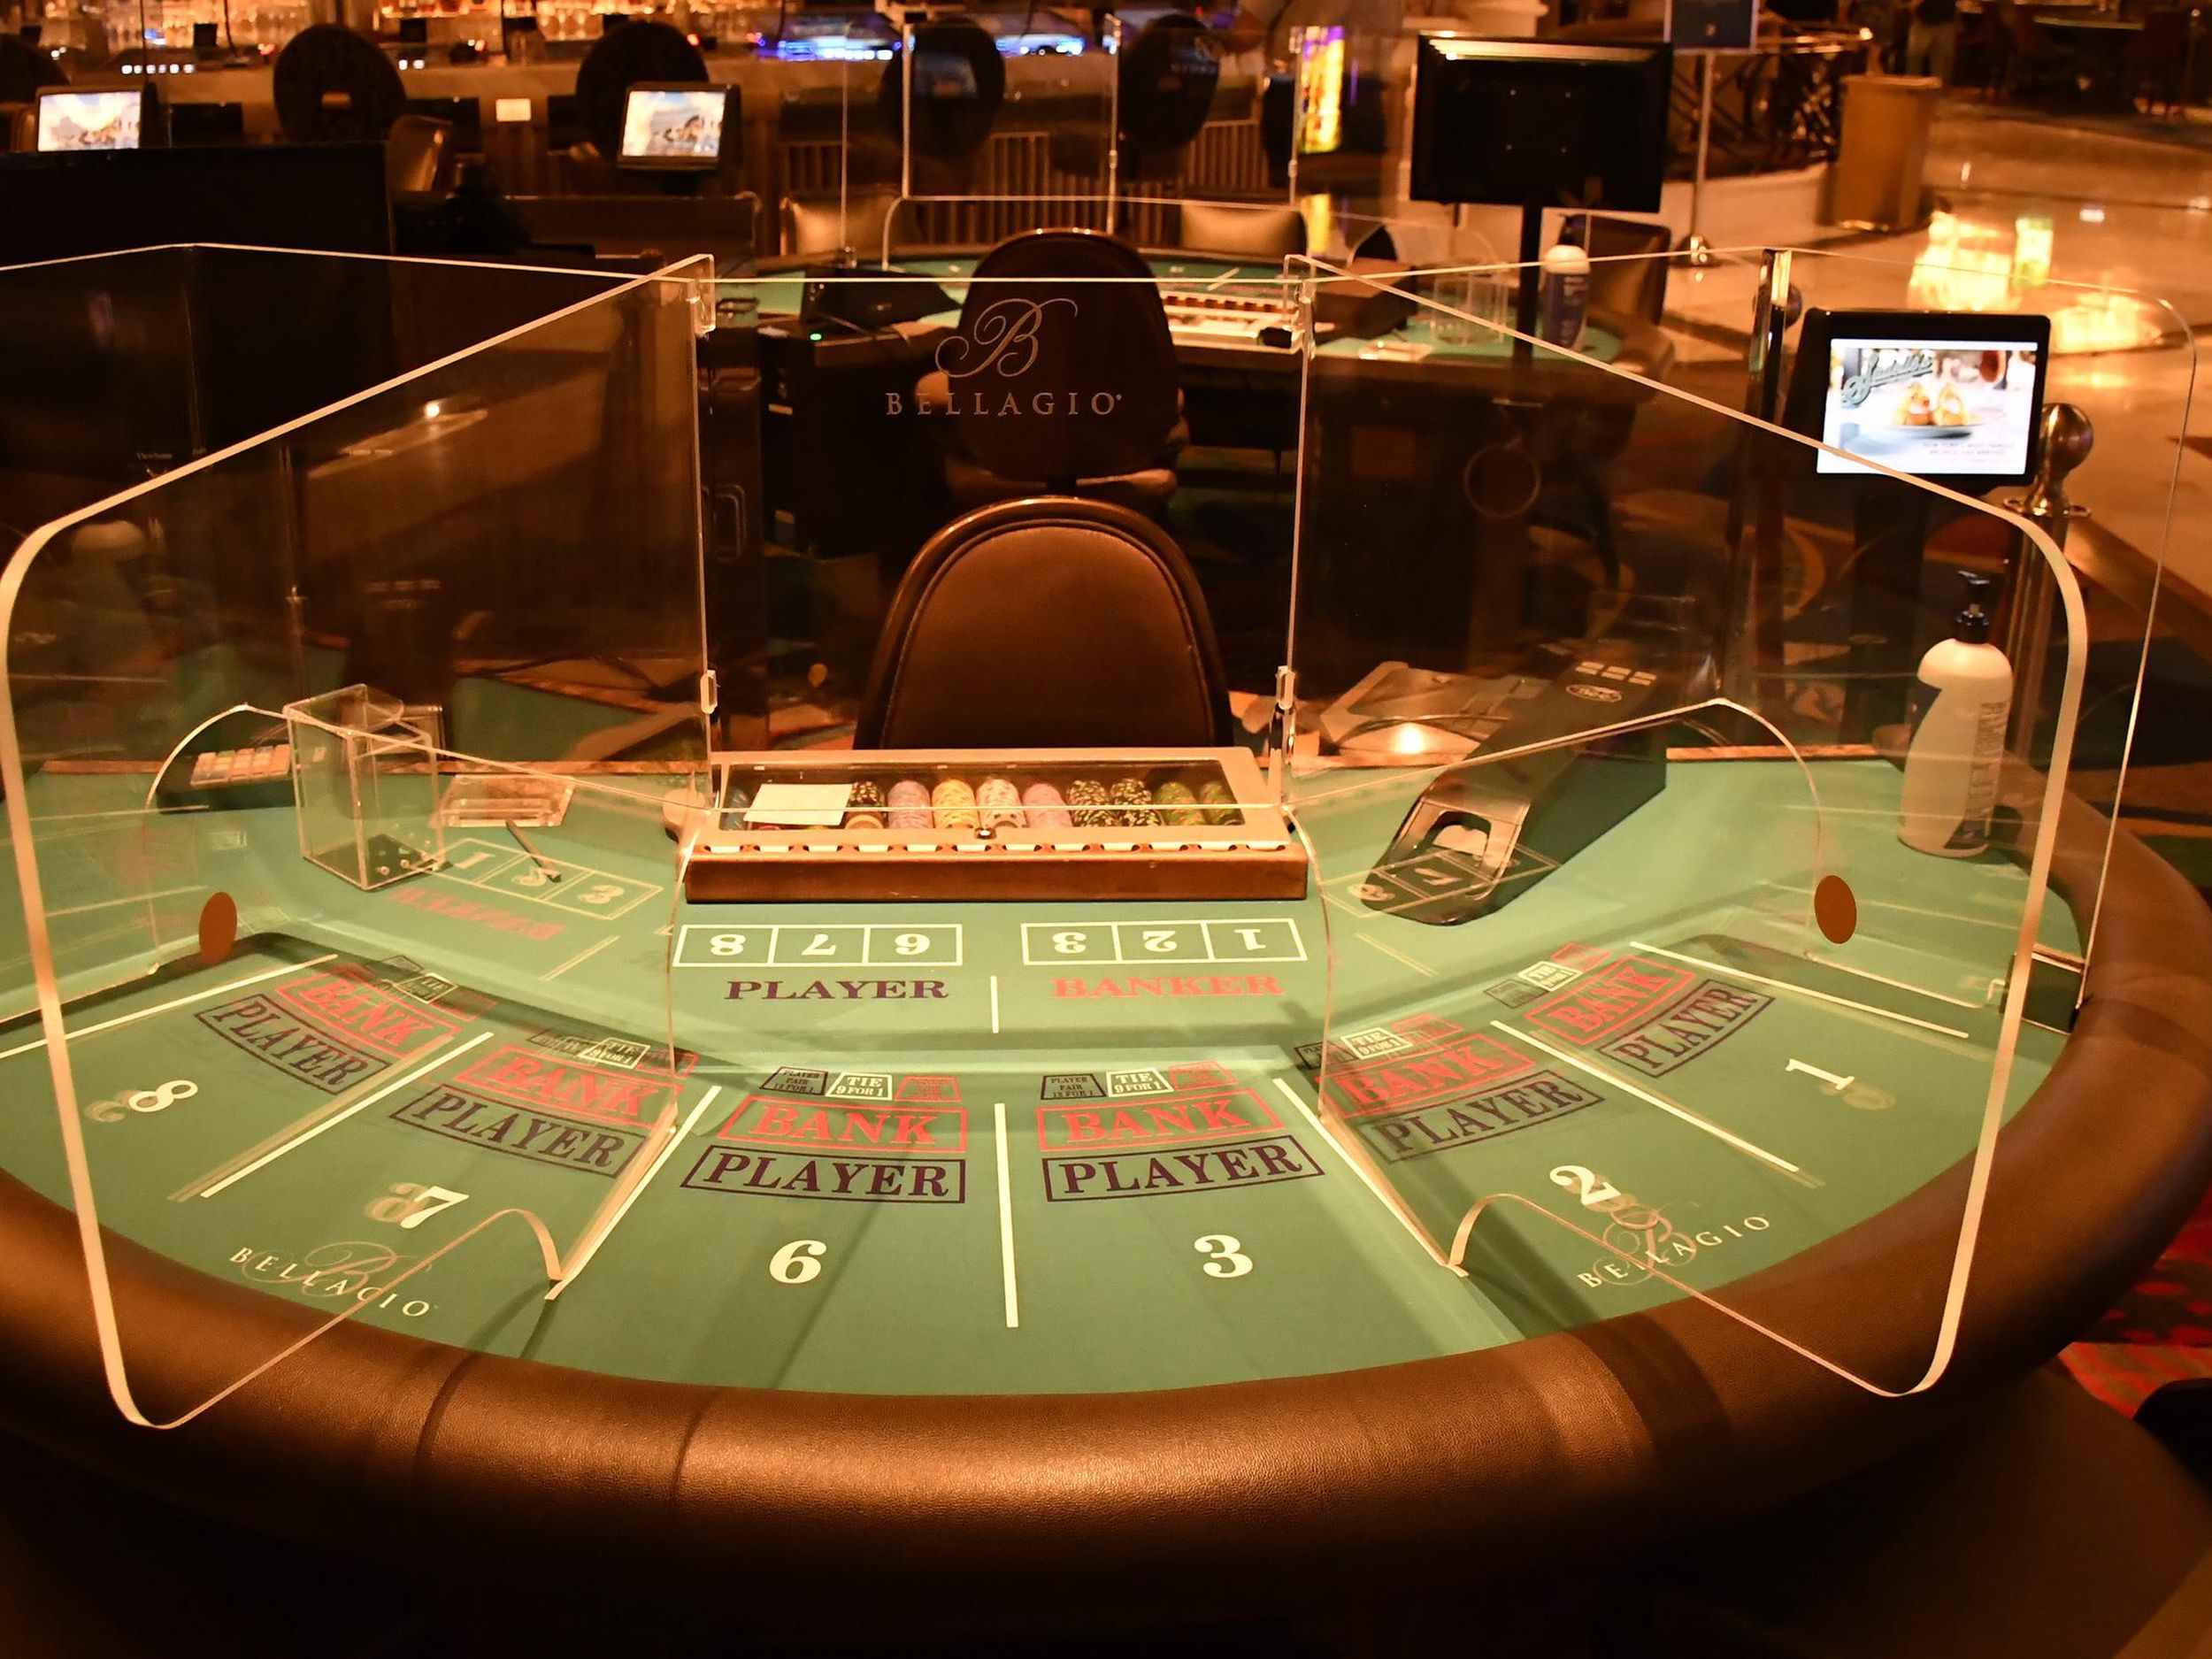 Las Vegas Casinos Reopen With $30-a-Night Rooms on the Strip - Bloomberg